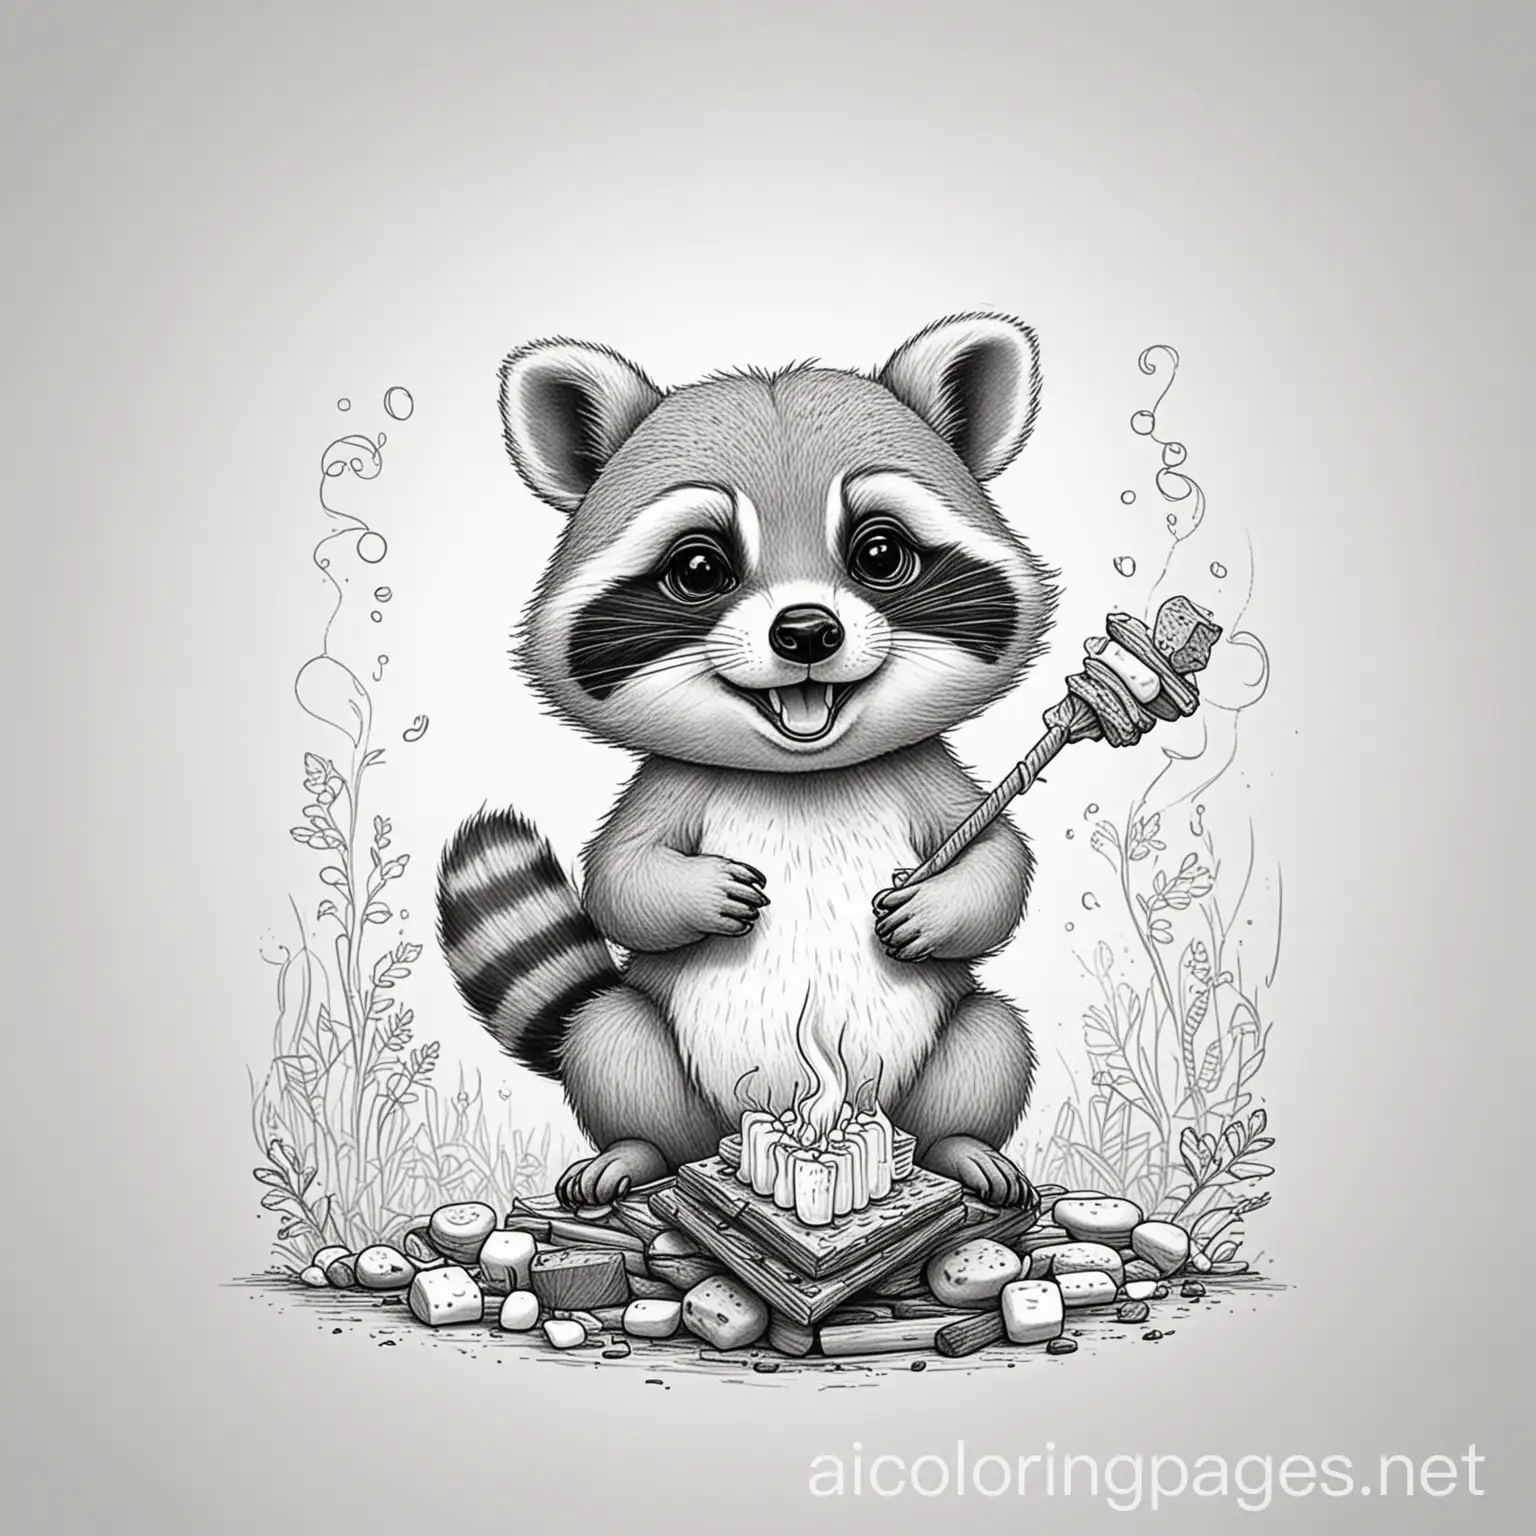 happy raccoon making smores, Coloring Page, black and white, line art, white background, Simplicity, Ample White Space. The background of the coloring page is plain white to make it easy for young children to color within the lines. The outlines of all the subjects are easy to distinguish, making it simple for kids to color without too much difficulty